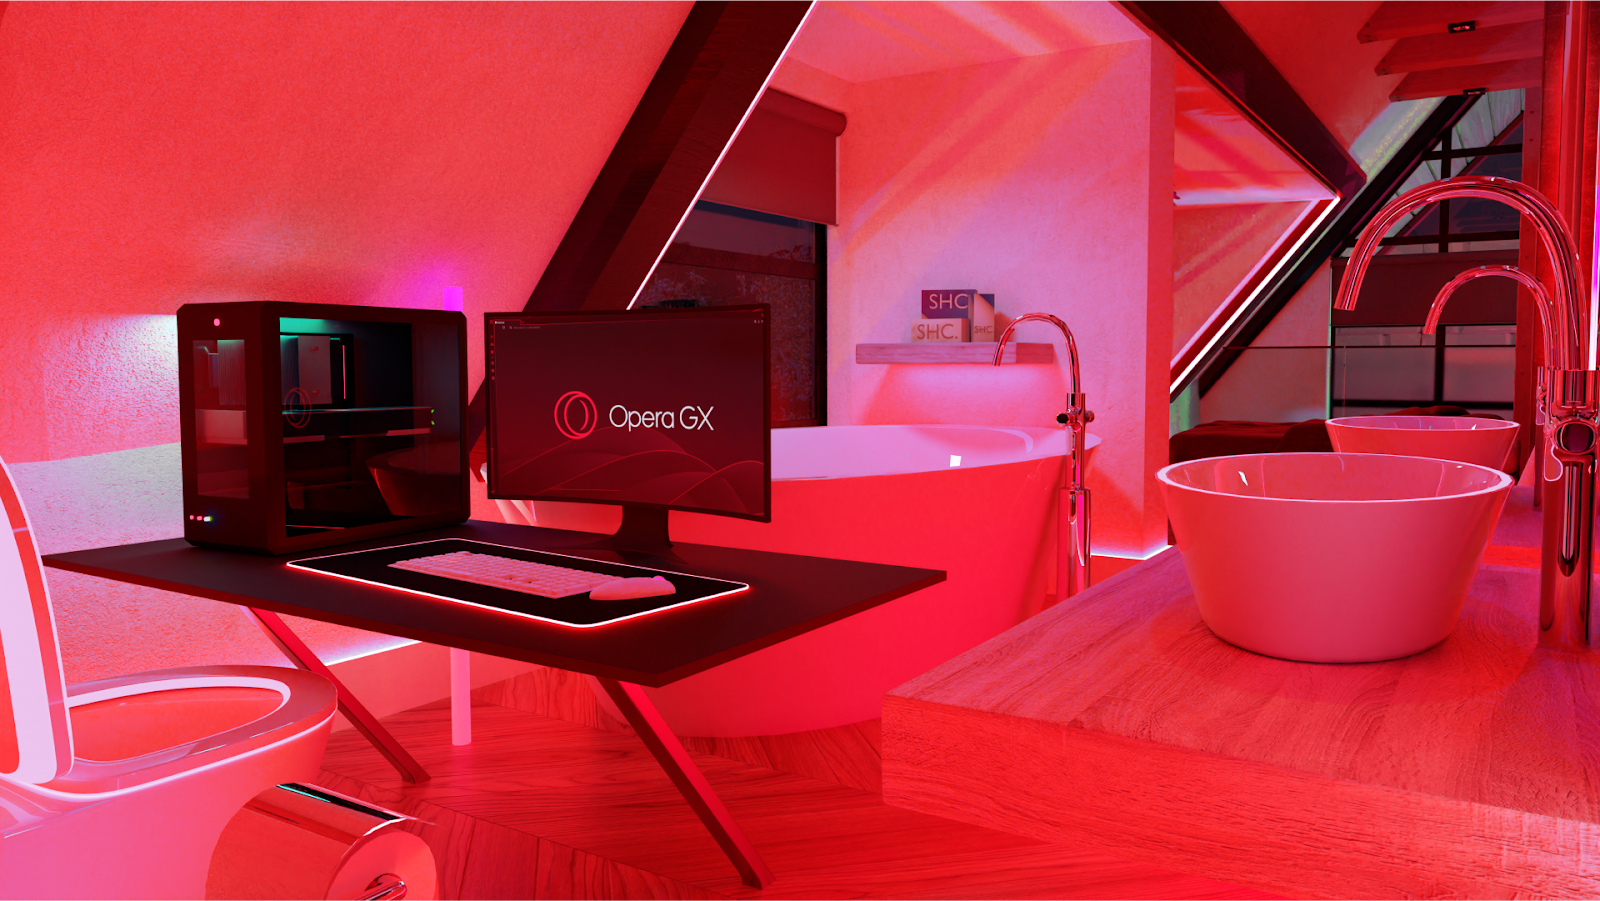 Opera GX browser teases real estate concept for exclusive gaming